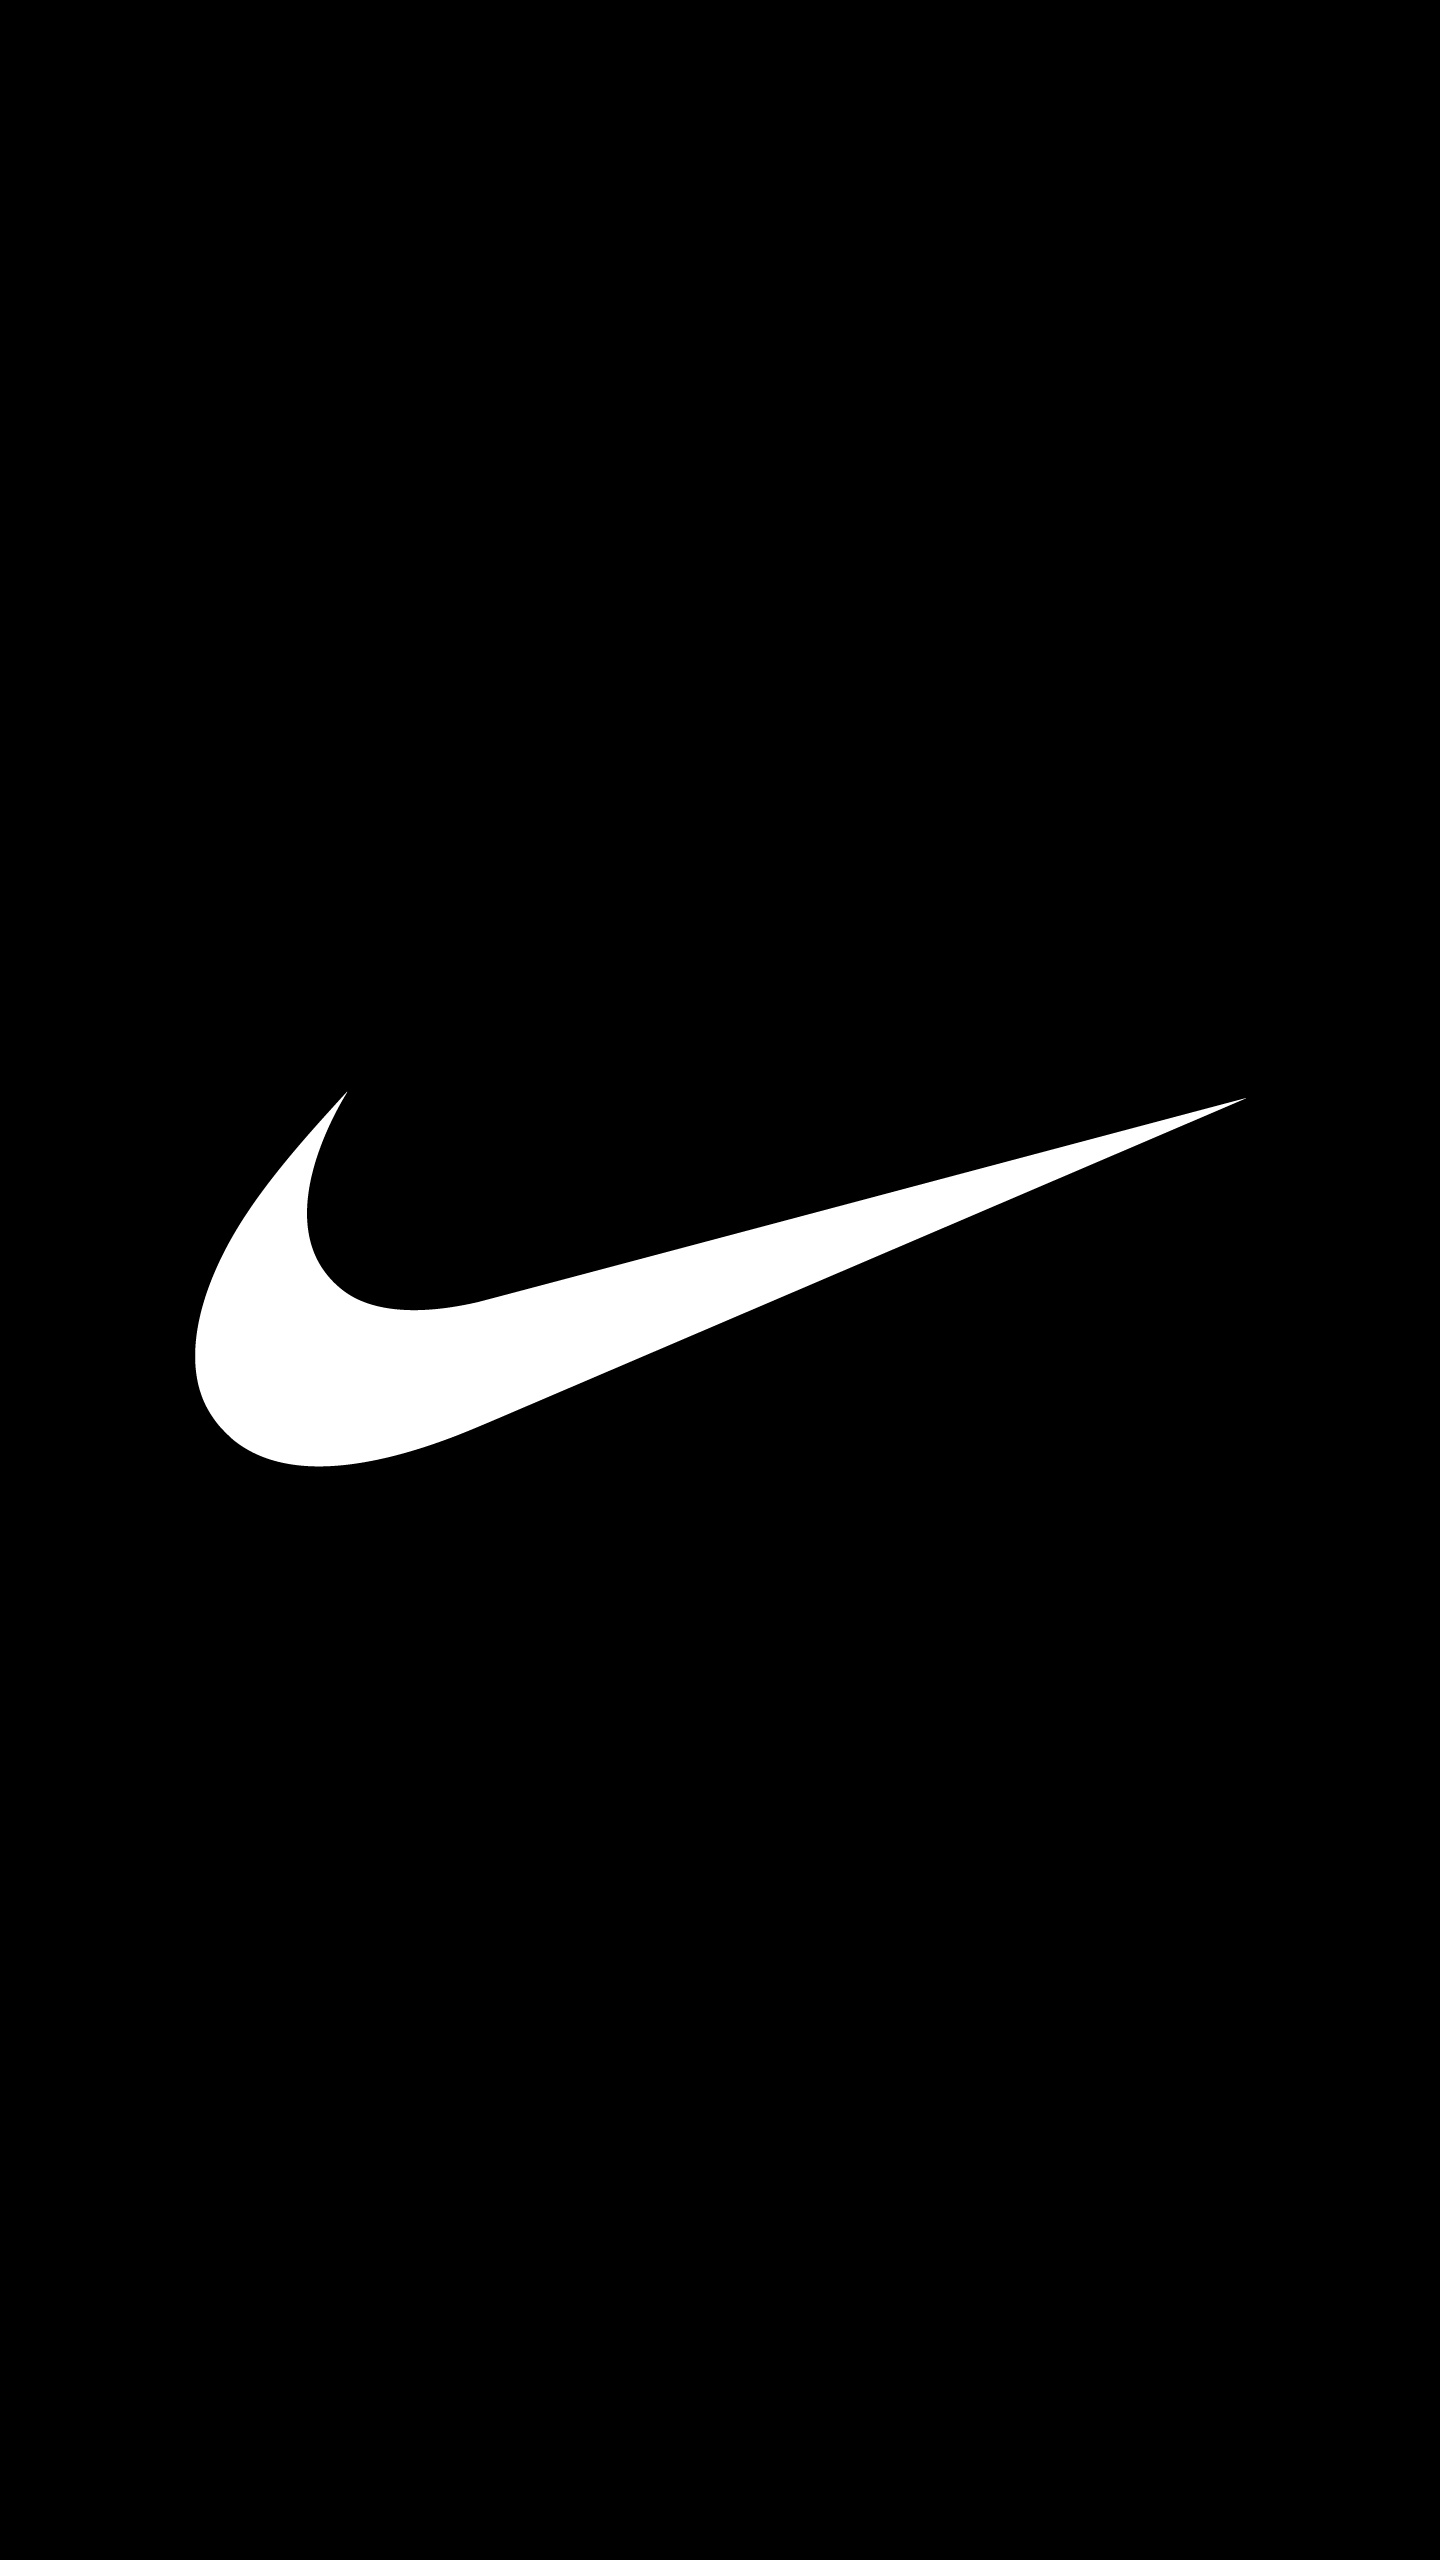 4K Nike phone wallpapers, Quality backgrounds, Mobile wallpaper, Nike brand, 1440x2560 HD Handy